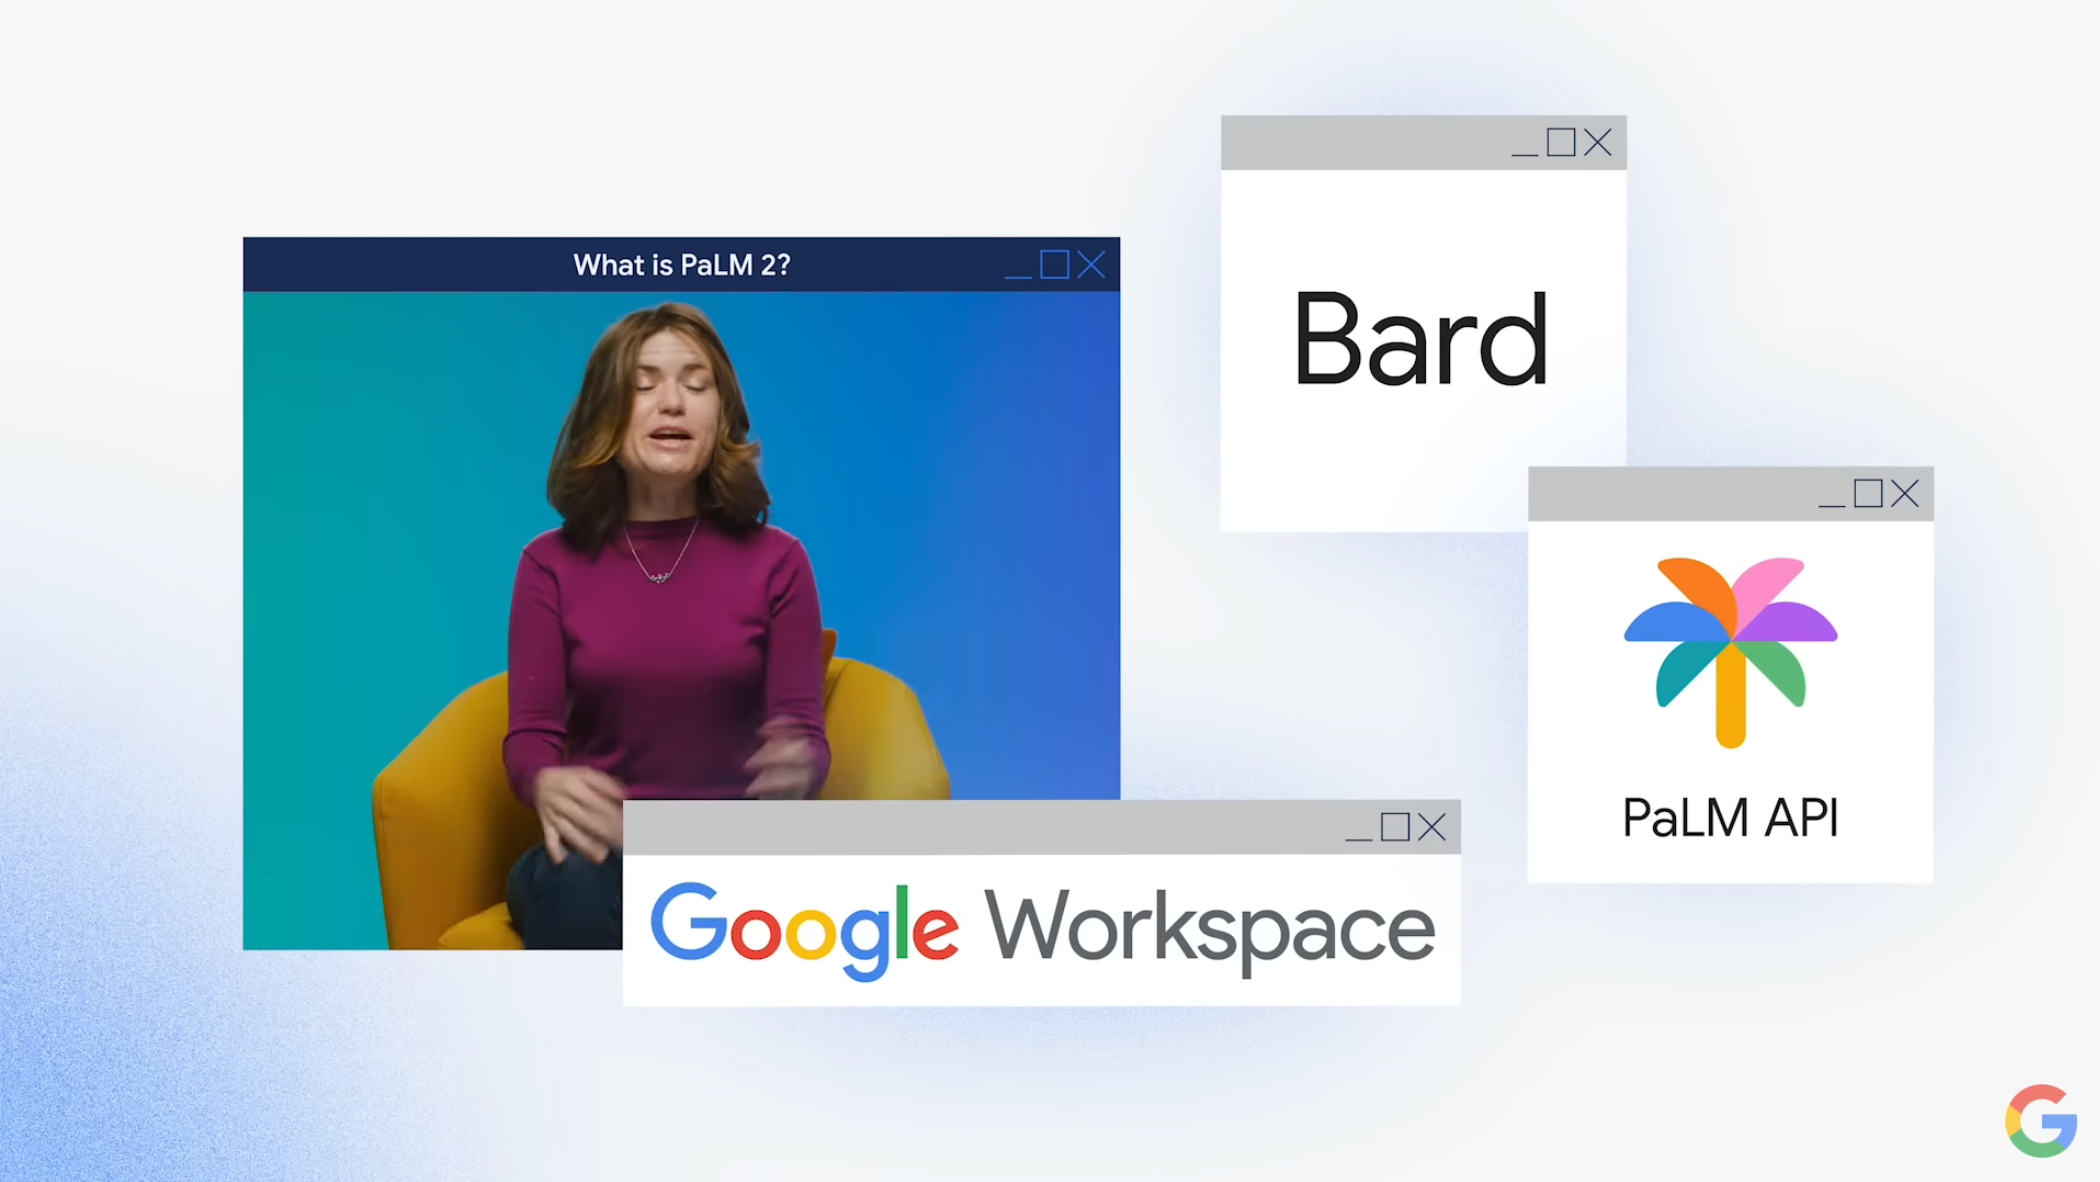 Presentation shows PaLM icons for Bard and Workspace.